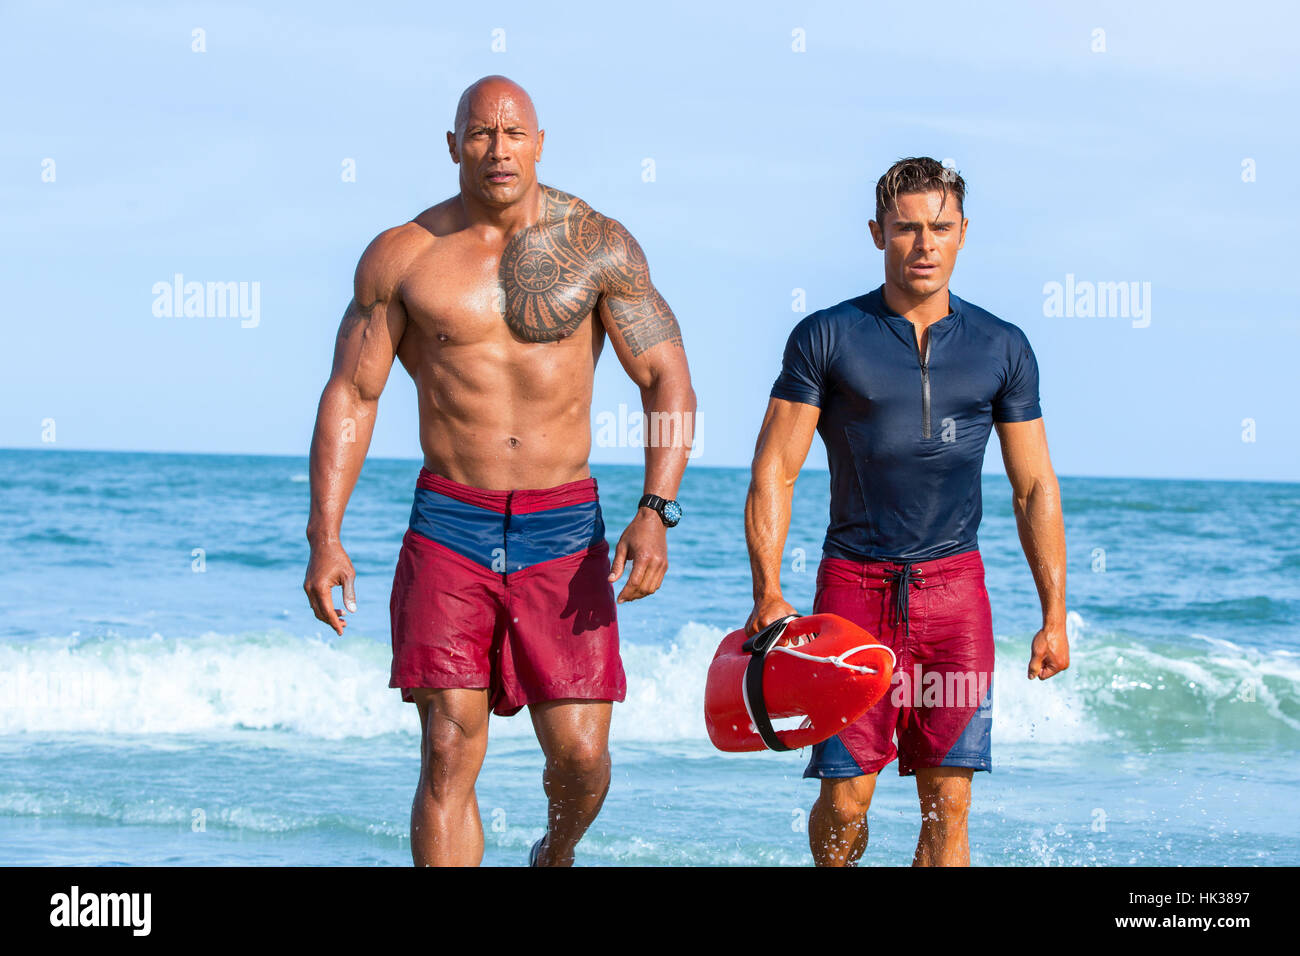 RELEASE DATE: May 19, 2017 TITLE: Baywatch STUDIO: Paramount Pictures DIRECTOR: Seth Gordon PLOT: Two unlikely prospective lifeguards vie for jobs alongside the buff bodies who patrol a beach in California STARRING: Zac Efron as Matt Brody, Dwayne Johnson as Mitch (Credit: © Paramount Pictures/Entertainment Pictures) Stock Photo